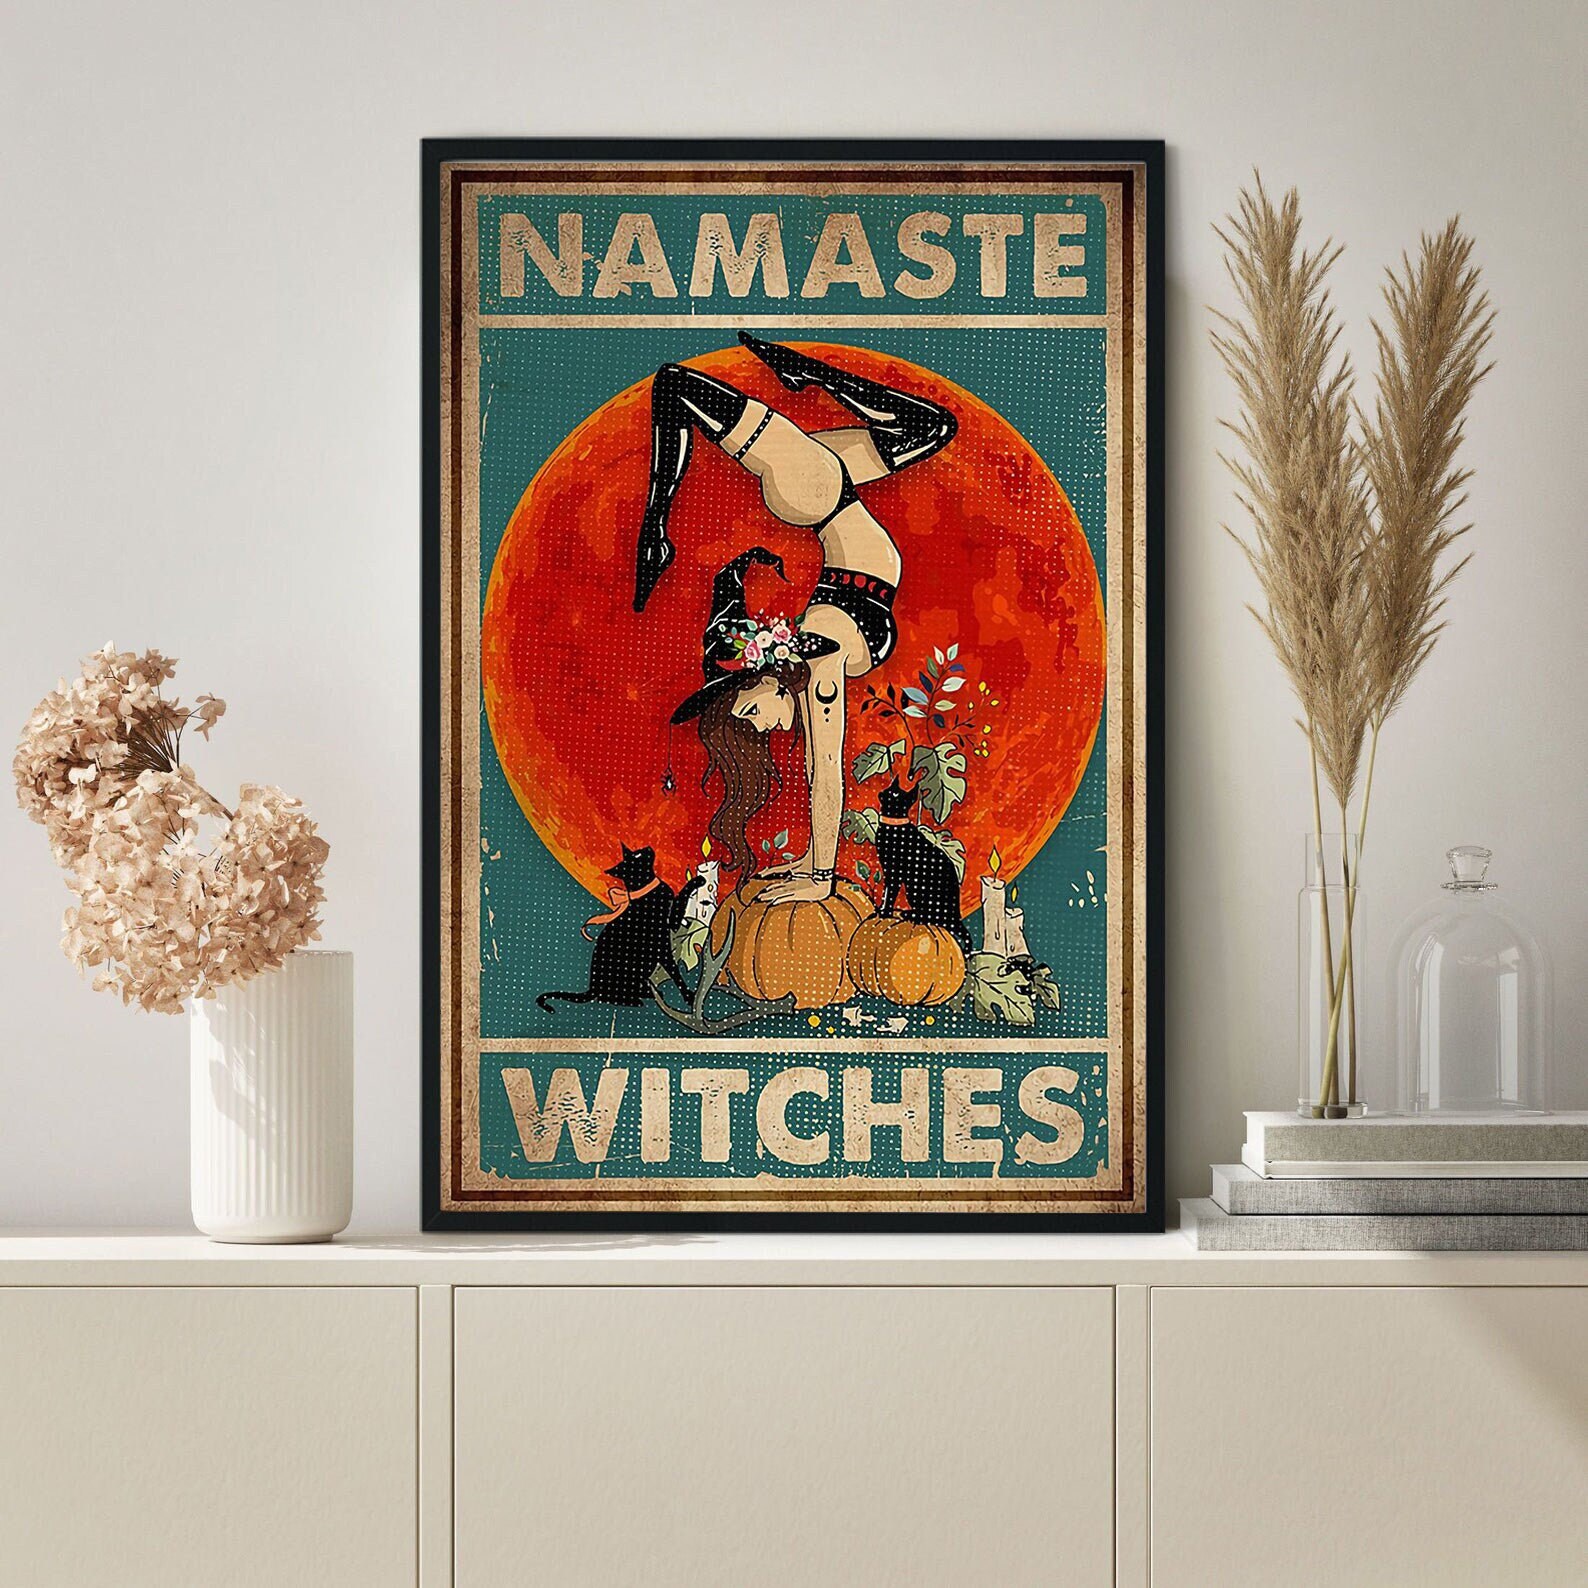 Namaste Witches Poster, Halloween Wall Decor, Yoga Halloween, Yoga Poster, Witch Yoga Decor, Halloween Yoga Art, Witch Poster, Pumpkin